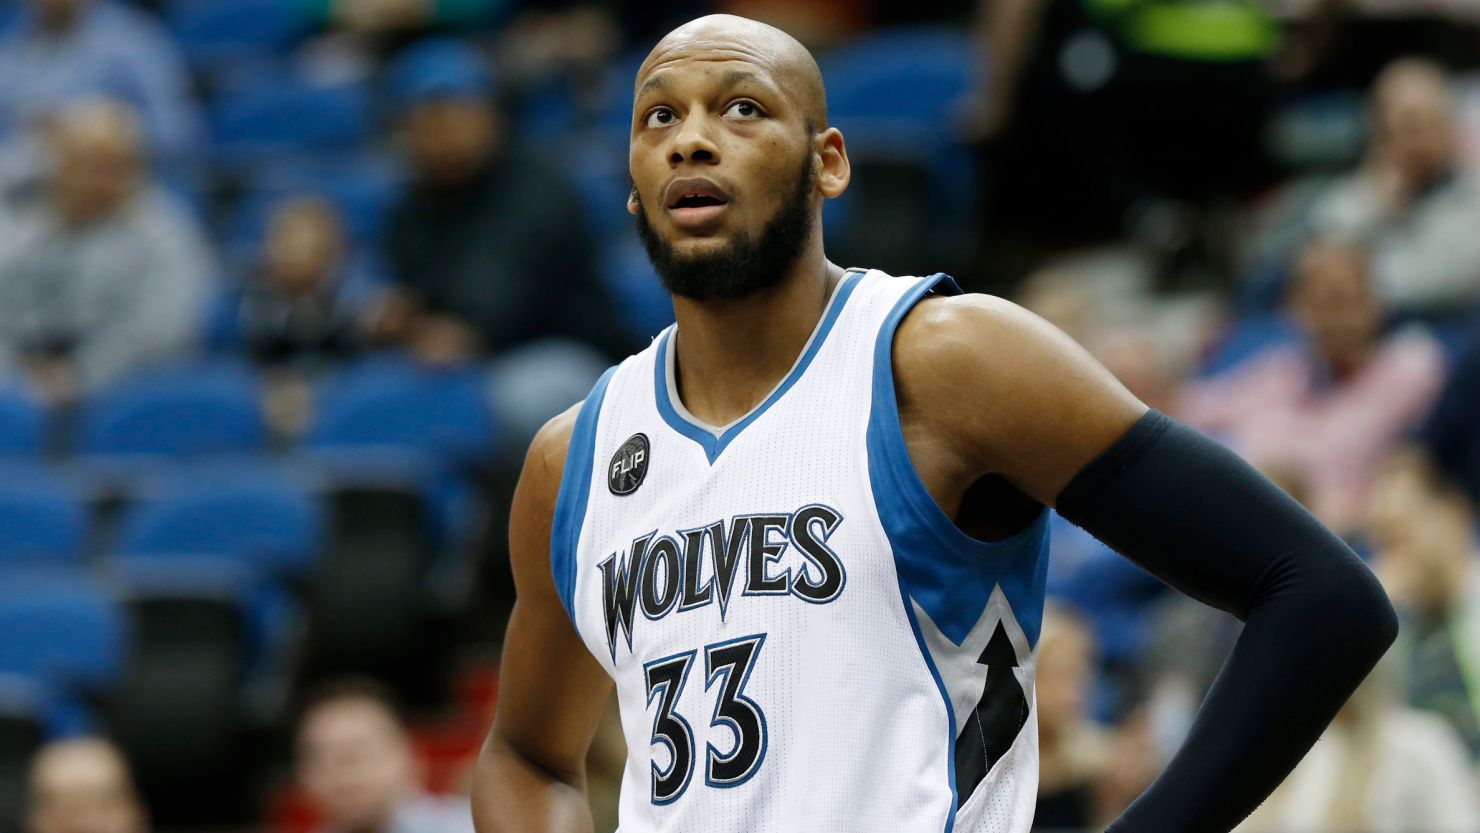 Adreian Payne is pictured playing for the Minnesota Timberwolves against the Charlotte Hornets in the first quarter of an NBA basketball game, Tuesday, Nov. 10, 2015, in Minneapolis.